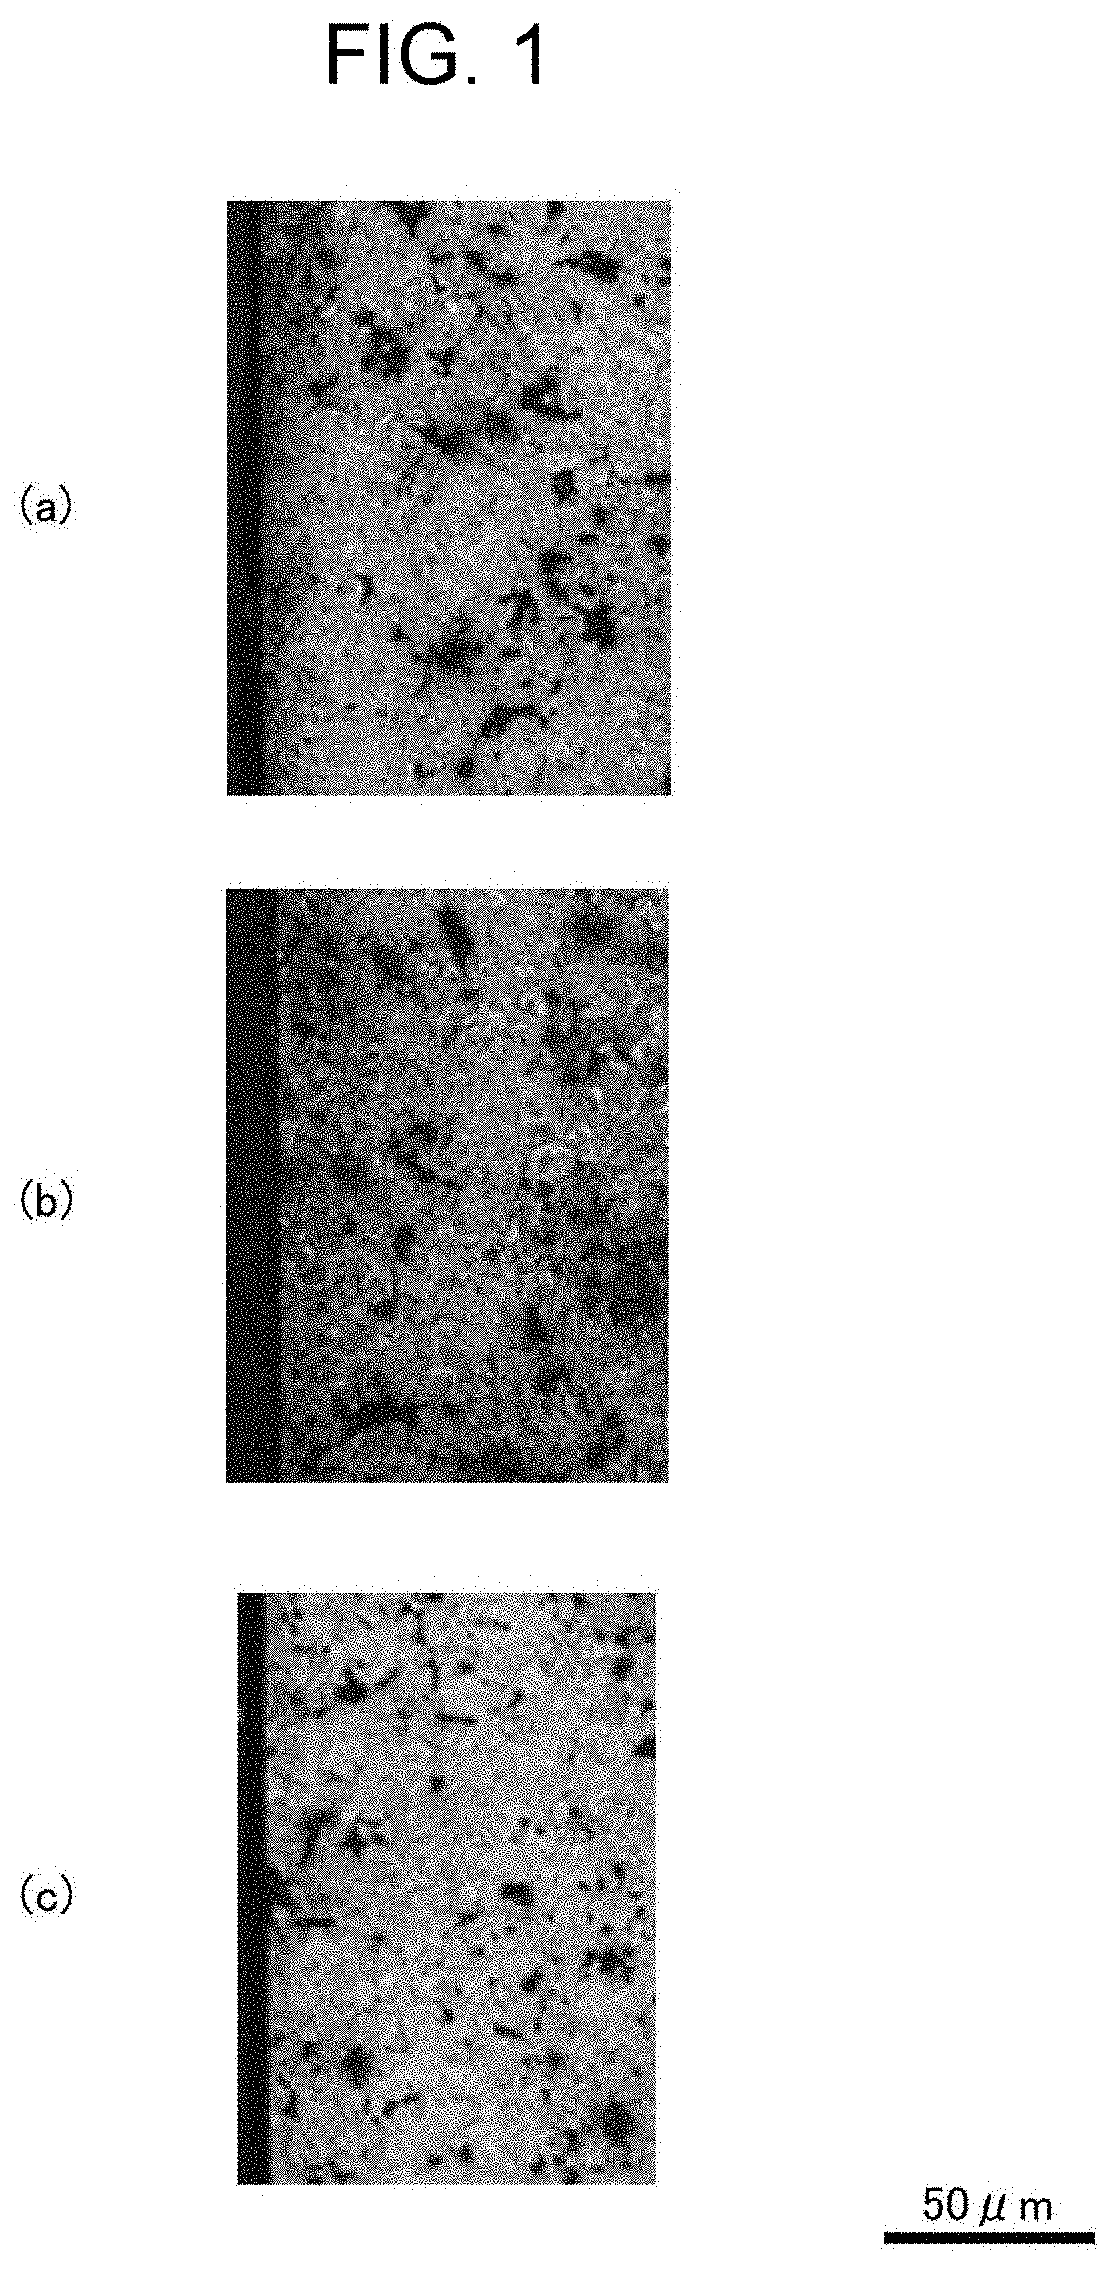 Iron-based sintered alloy material and production method therefor